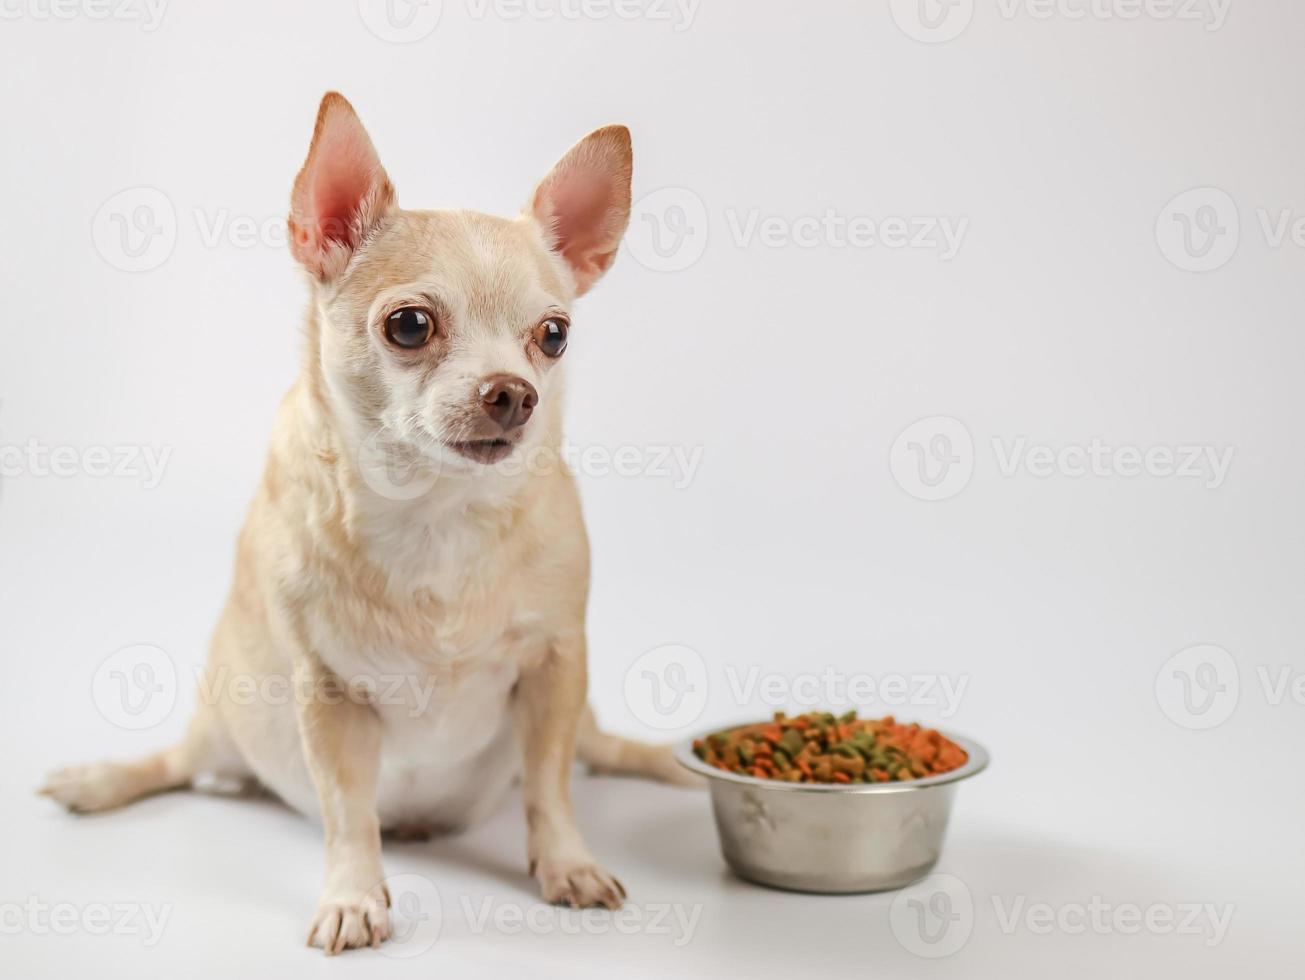 brown short hair Chihuahua dog sitting beside dog food bowl on white background, waiting for his meal. Pet's health or behavior concept. photo